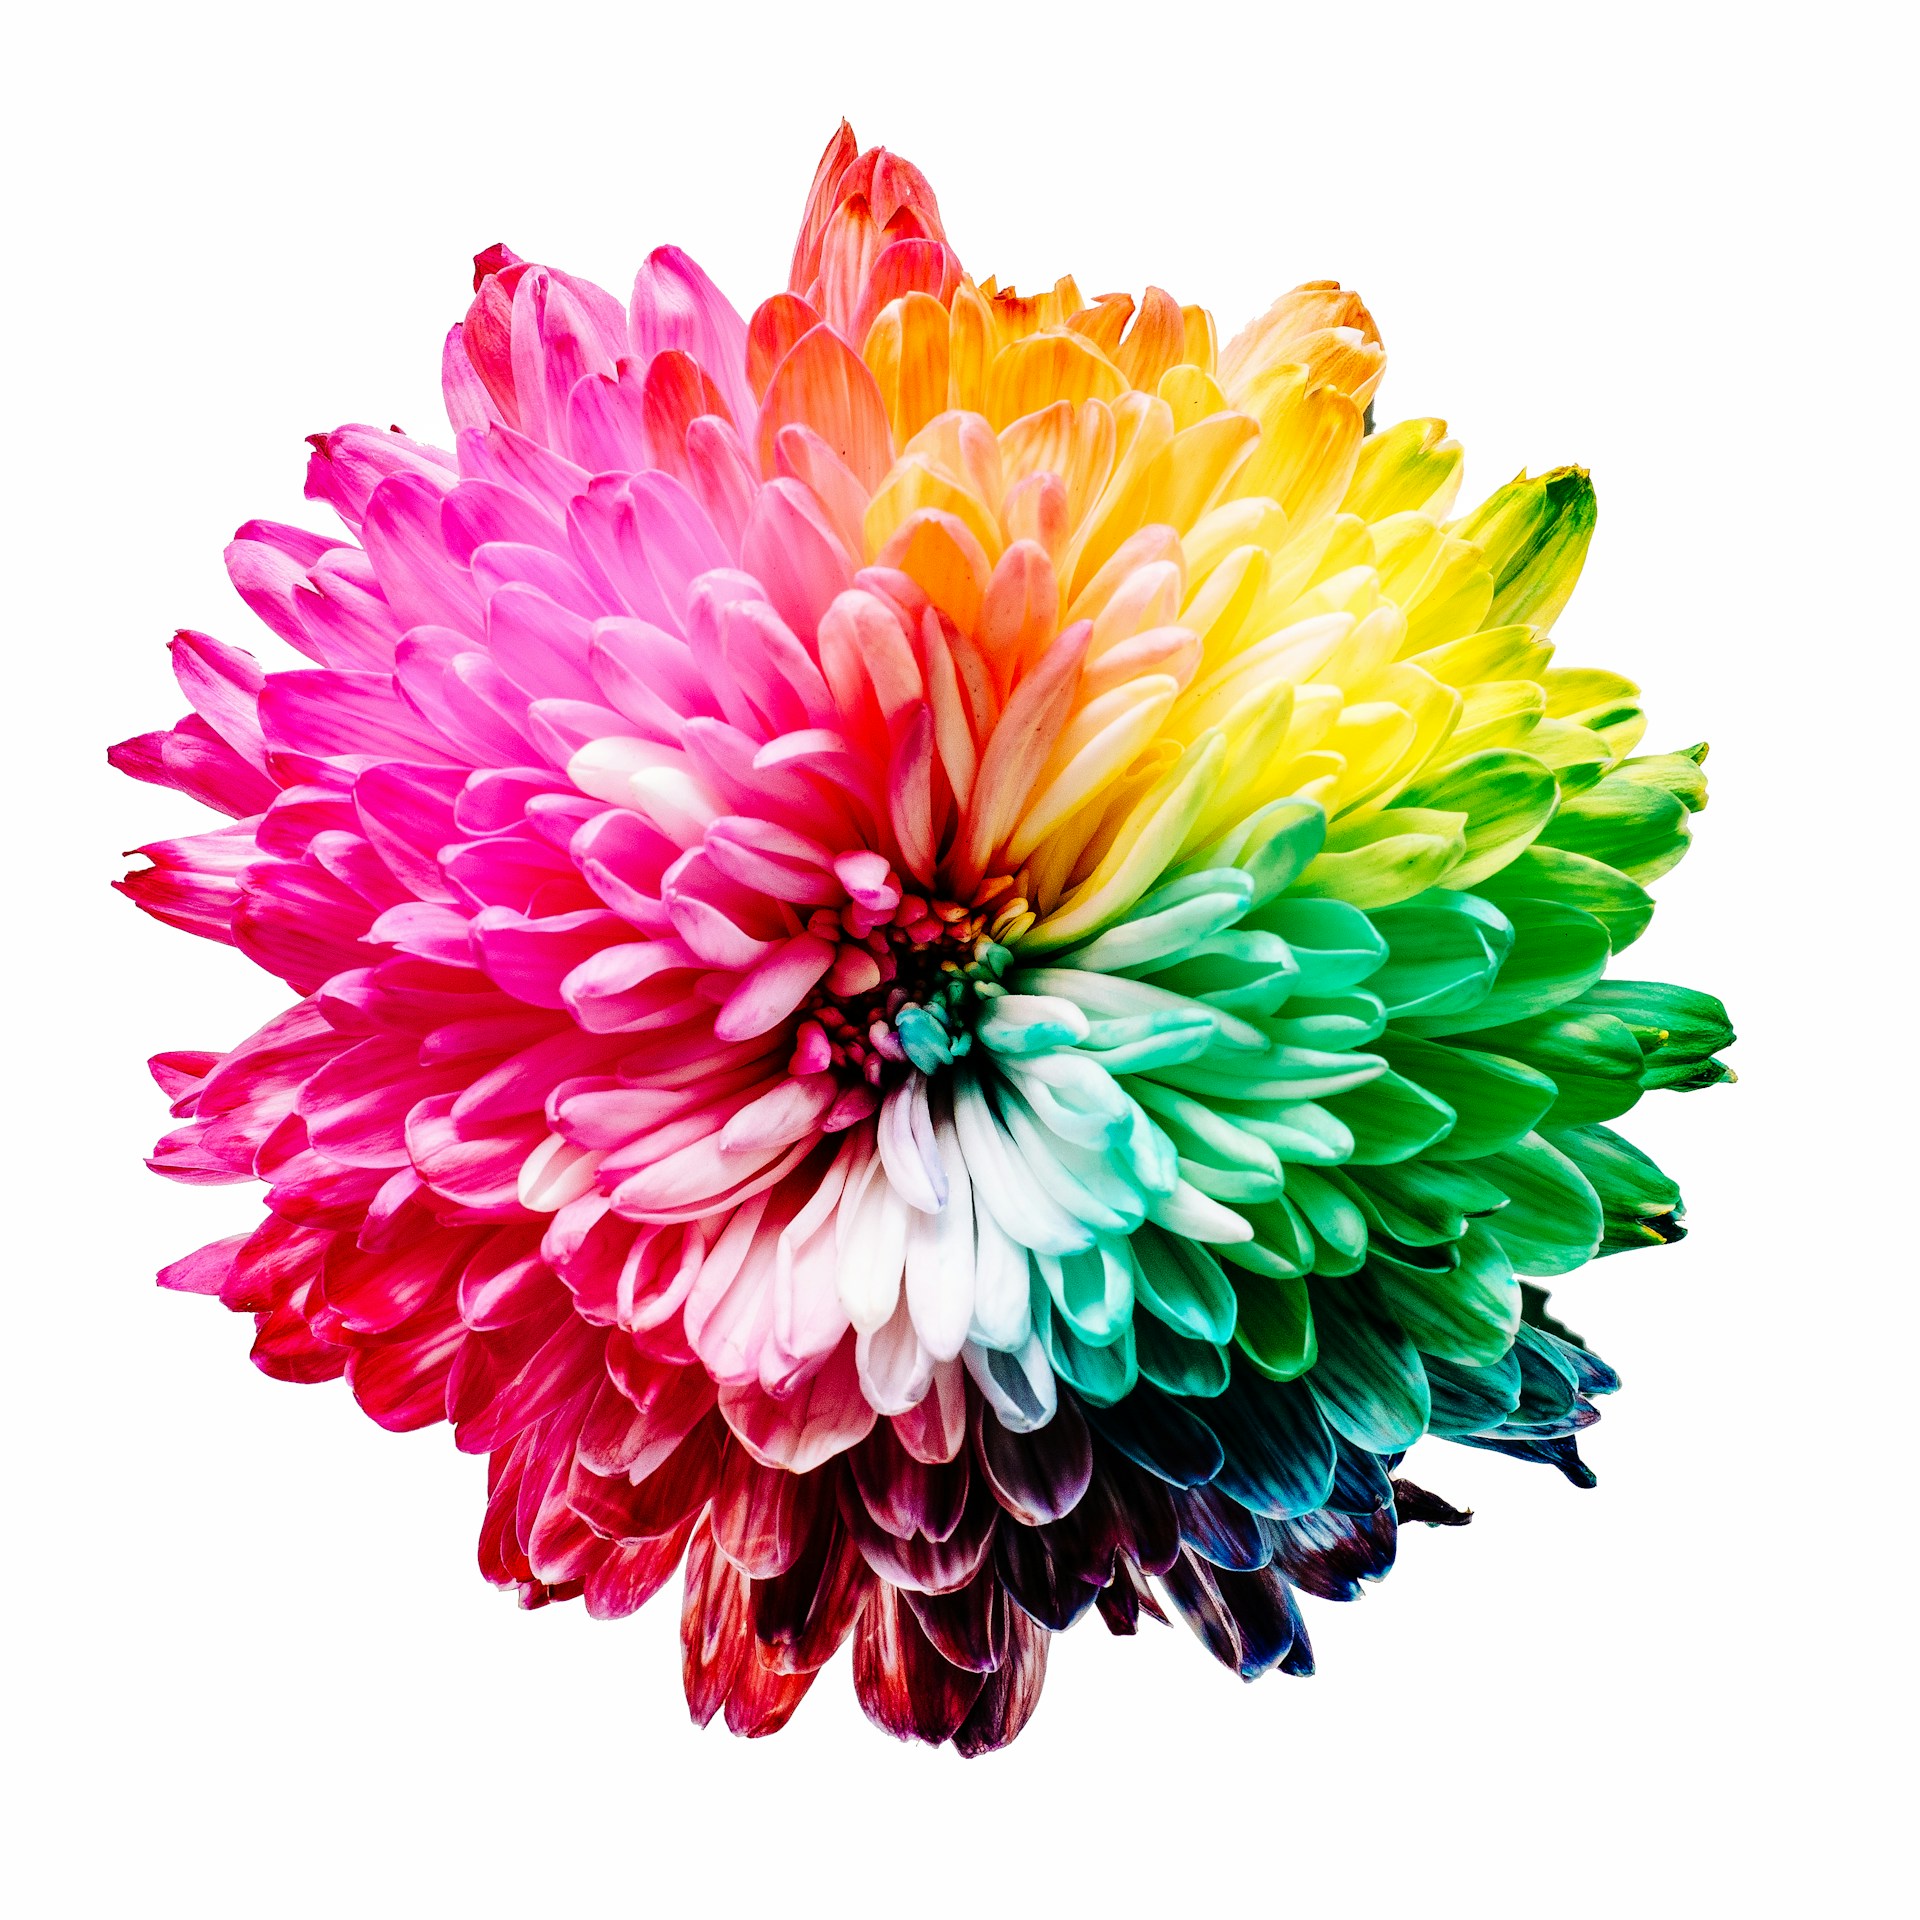 Abstract Flower Colorful Wallpaper 1920x1920